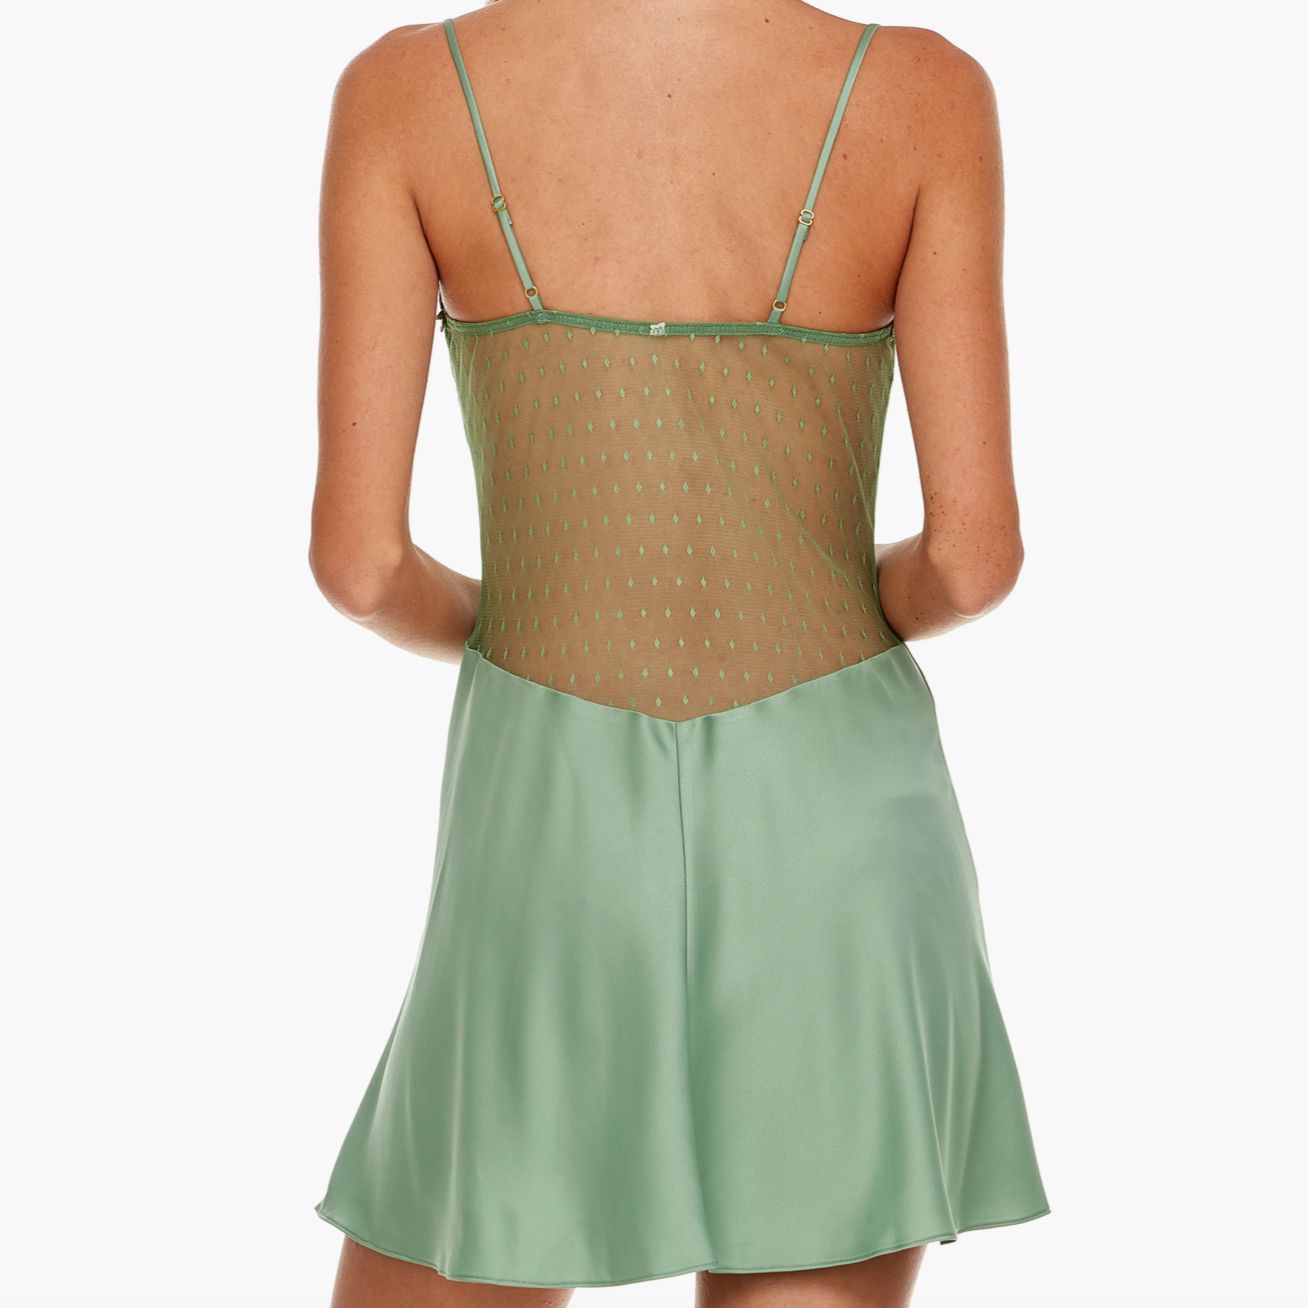 Flora Nikrooz Showstopper Chemise 8060 in Forest Green-Loungewear-Flora Nikrooz-Forest Green-XSmall-Anna Bella Fine Lingerie, Reveal Your Most Gorgeous Self!